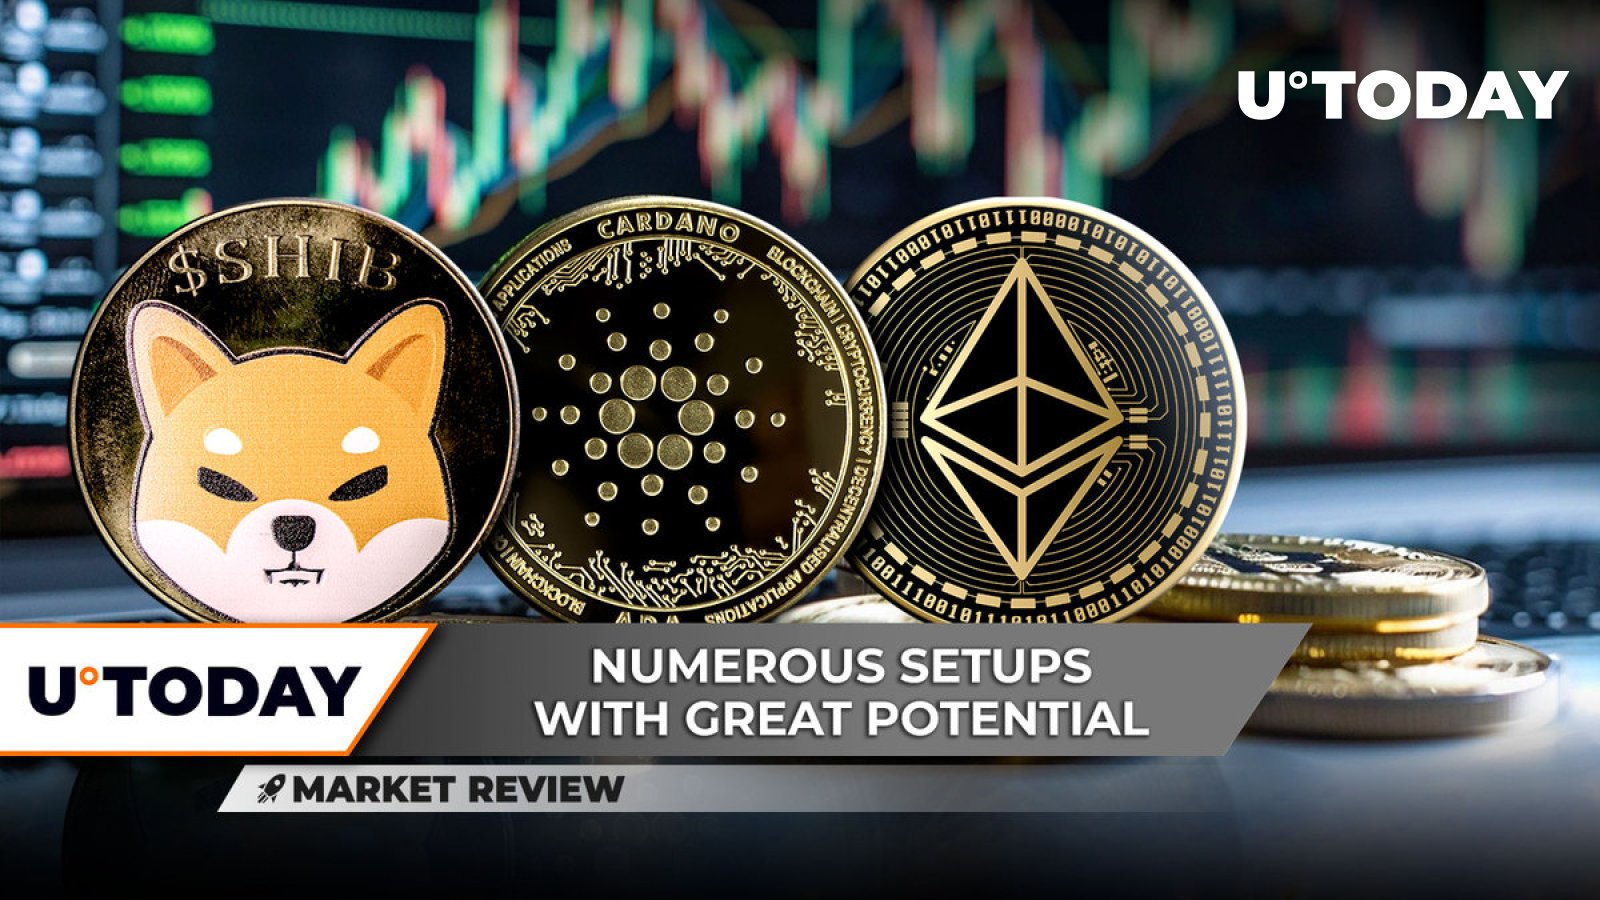 Ethereum's (ETH) $4,000 Is New Goal, Shiba Inu (SHIB) To Explode In Symmetrical Triangle, Cardano (ADA) On Verge of Reversal